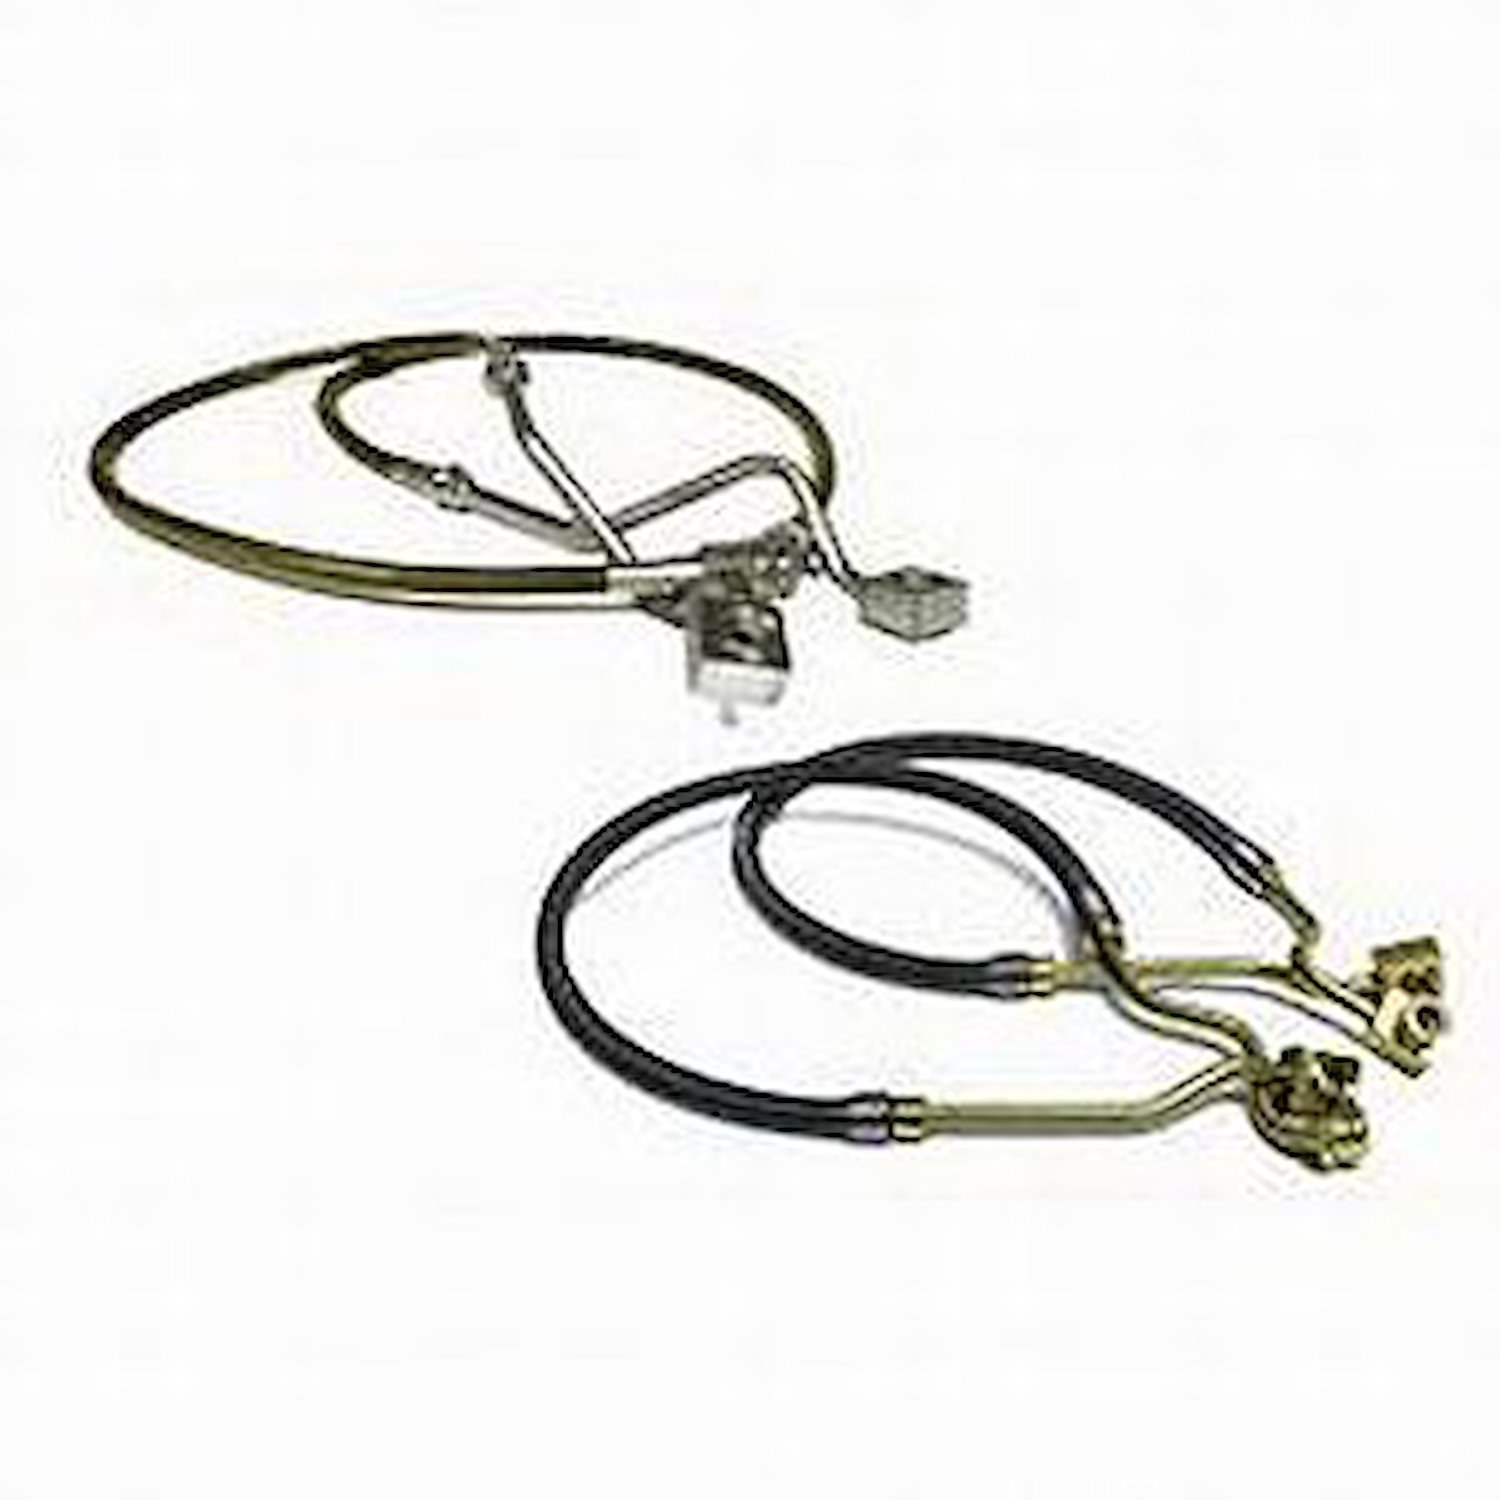 Bullet Proof Kevlar  Brake Hose Front Reinforced Braided Stainless Steel Length Over Stock 4 in. Vehicles w/4-6 in. Lift